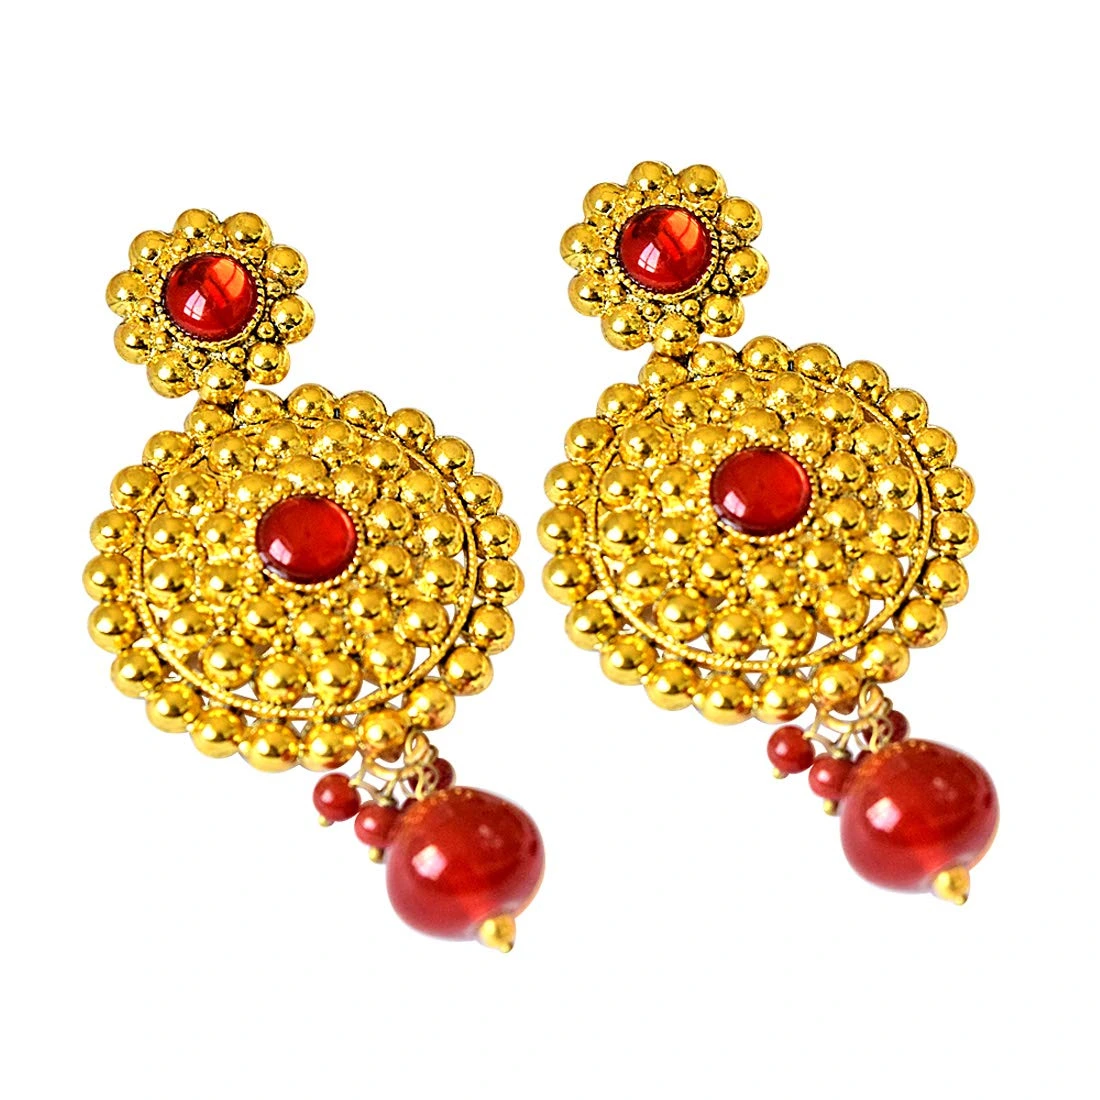 Traditional Rajasthani Style Red Coloured Stone & Gold Plated Round Shaped Chandbali Earrings (PSE53)